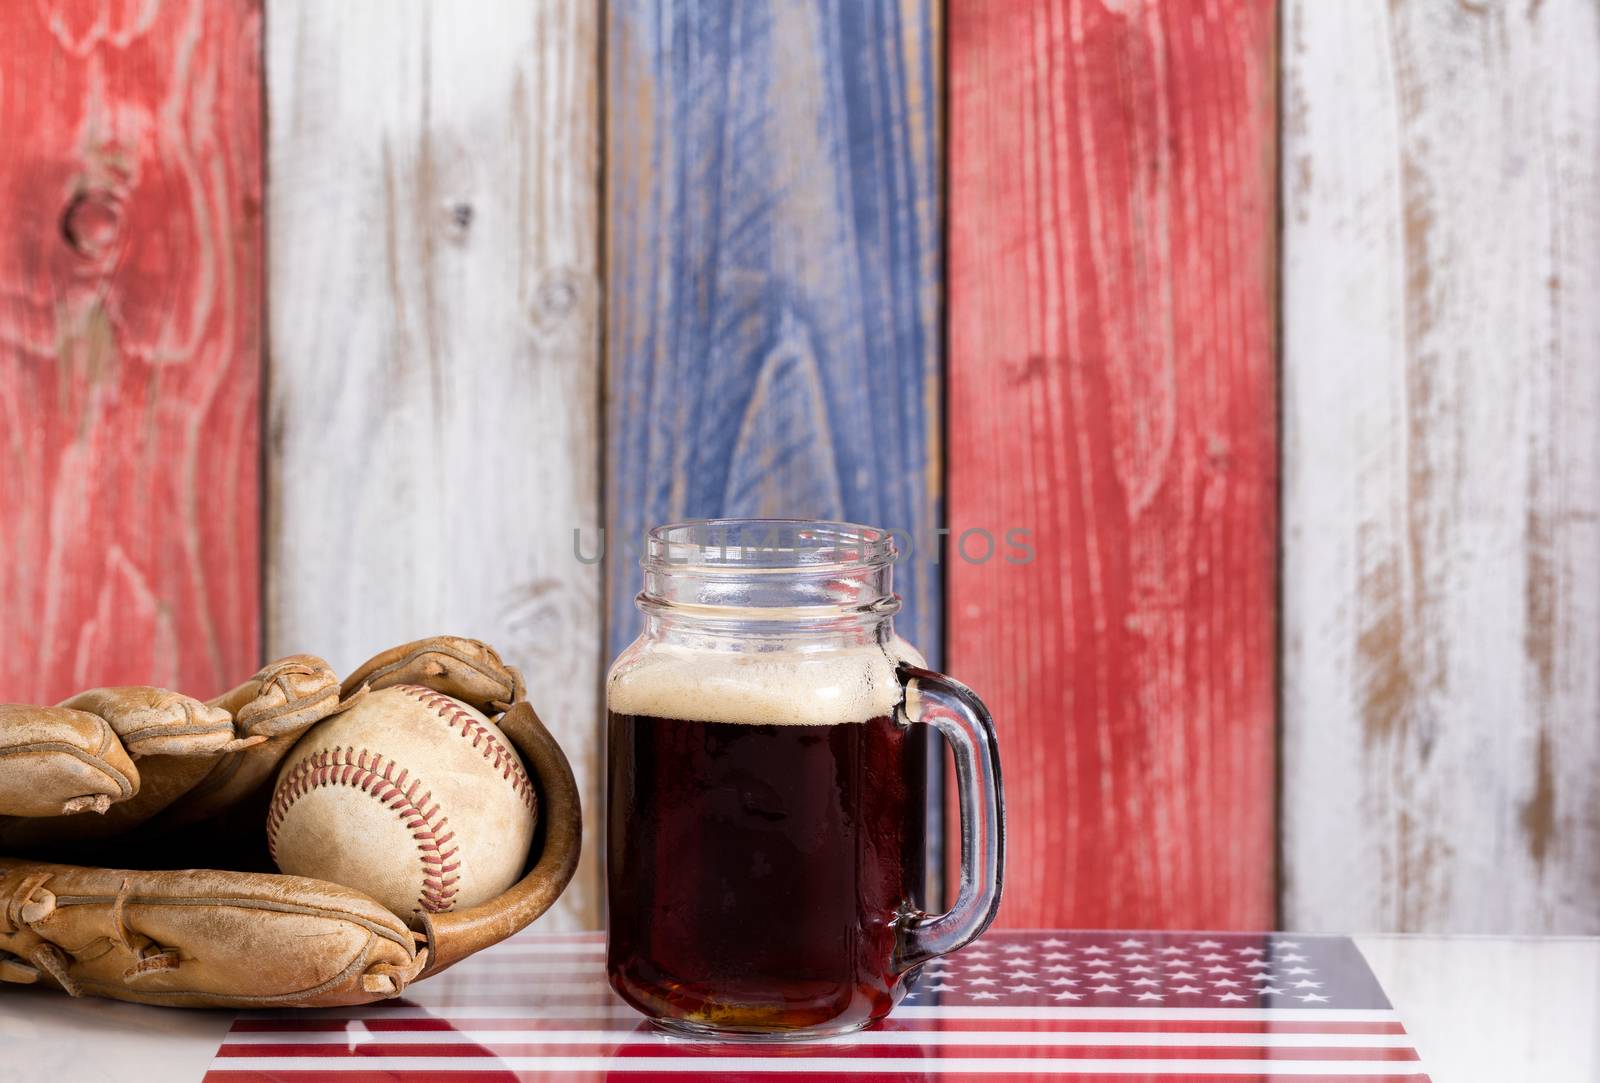 Beer and American Baseball equipment with faded wooden boards pa by tab1962